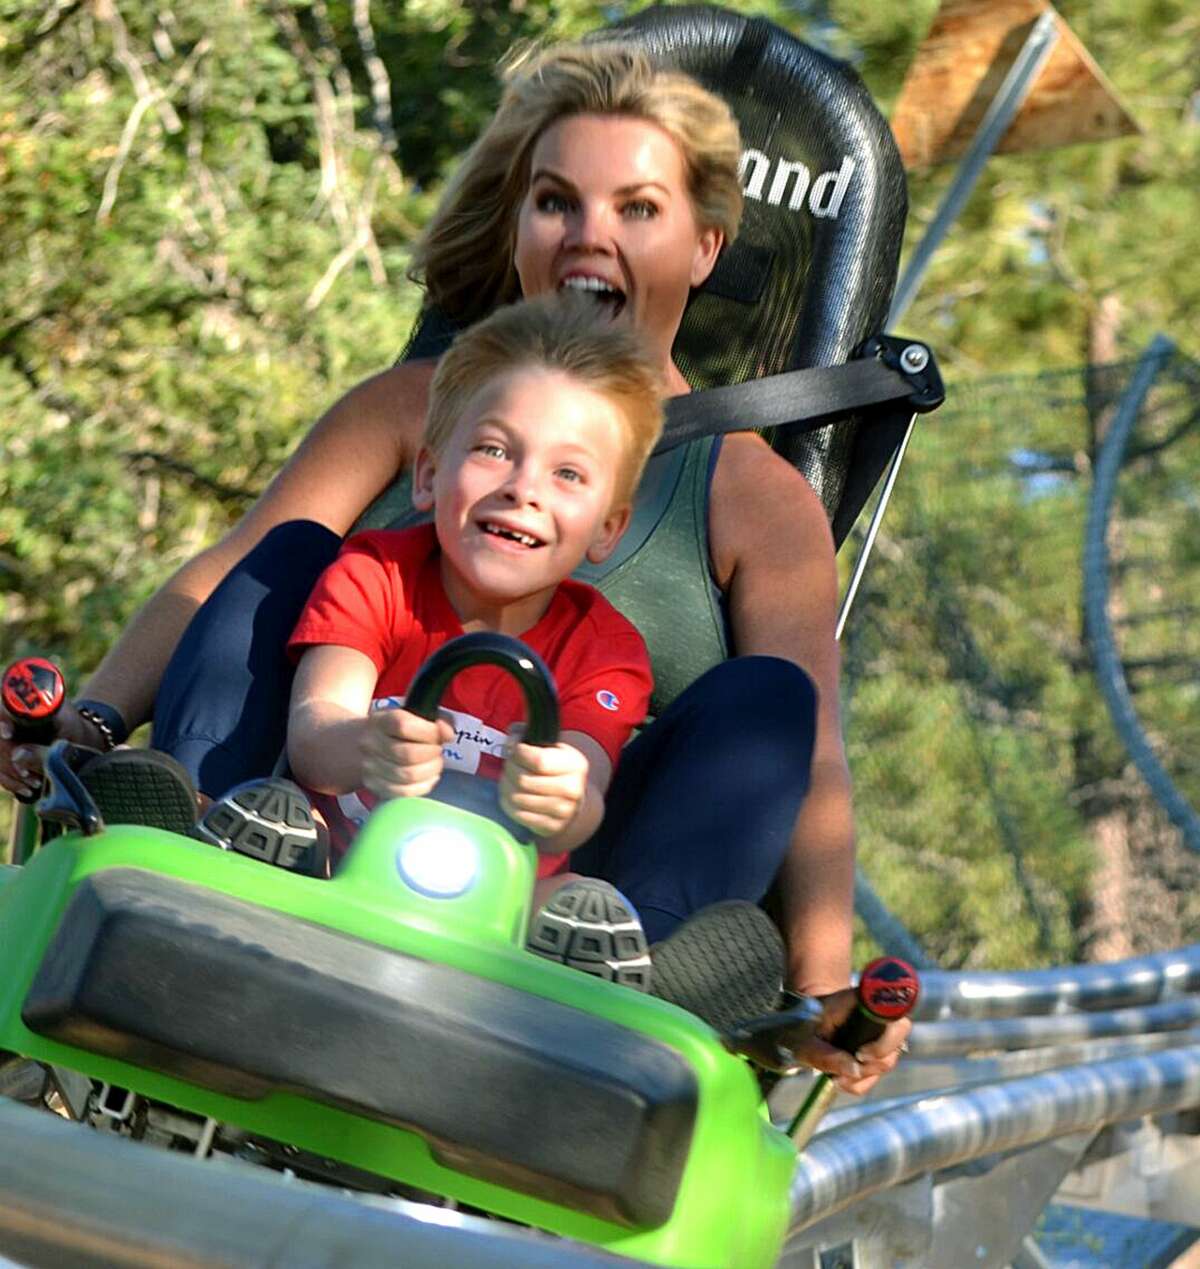 Aerie’s Resort in Grafton in September plans to open an Alpine Coaster, winding 3,000 feet along a Jersey County hillside. The ride will be the first of its kind in Illinois.